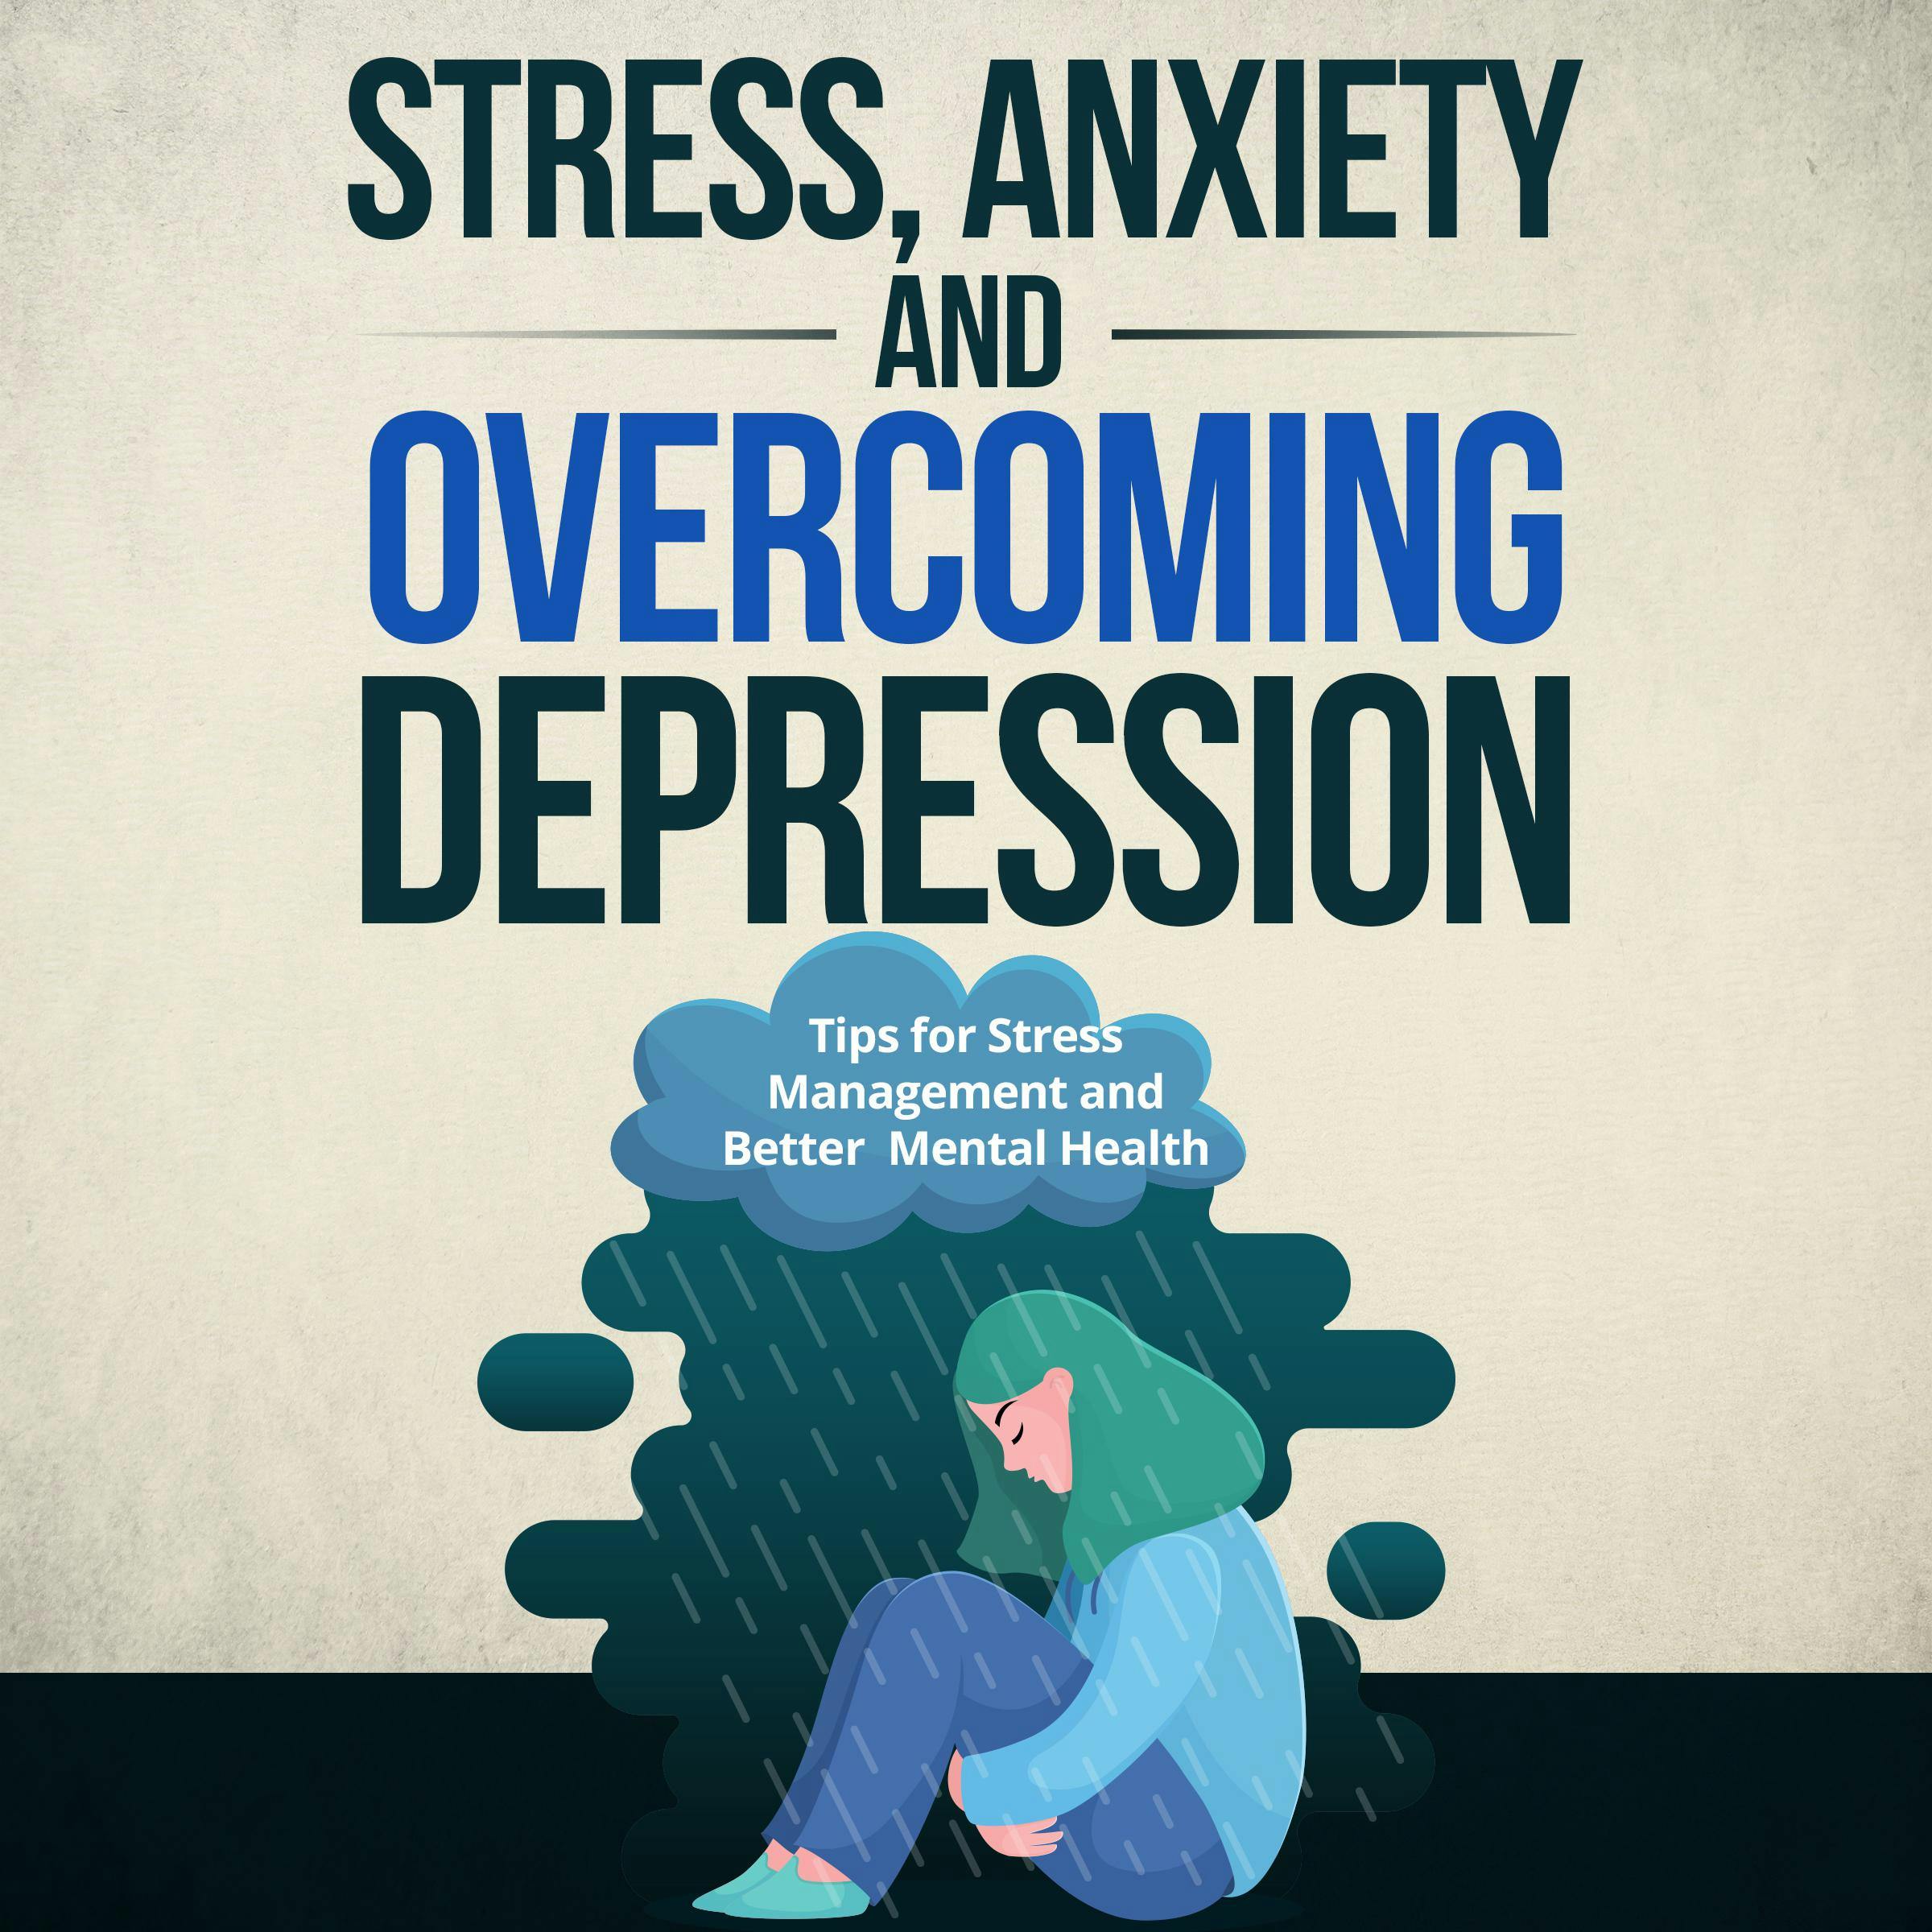 Dealing with stress and anxiety and overcoming depression: Tips for stress management and better mental health - undefined